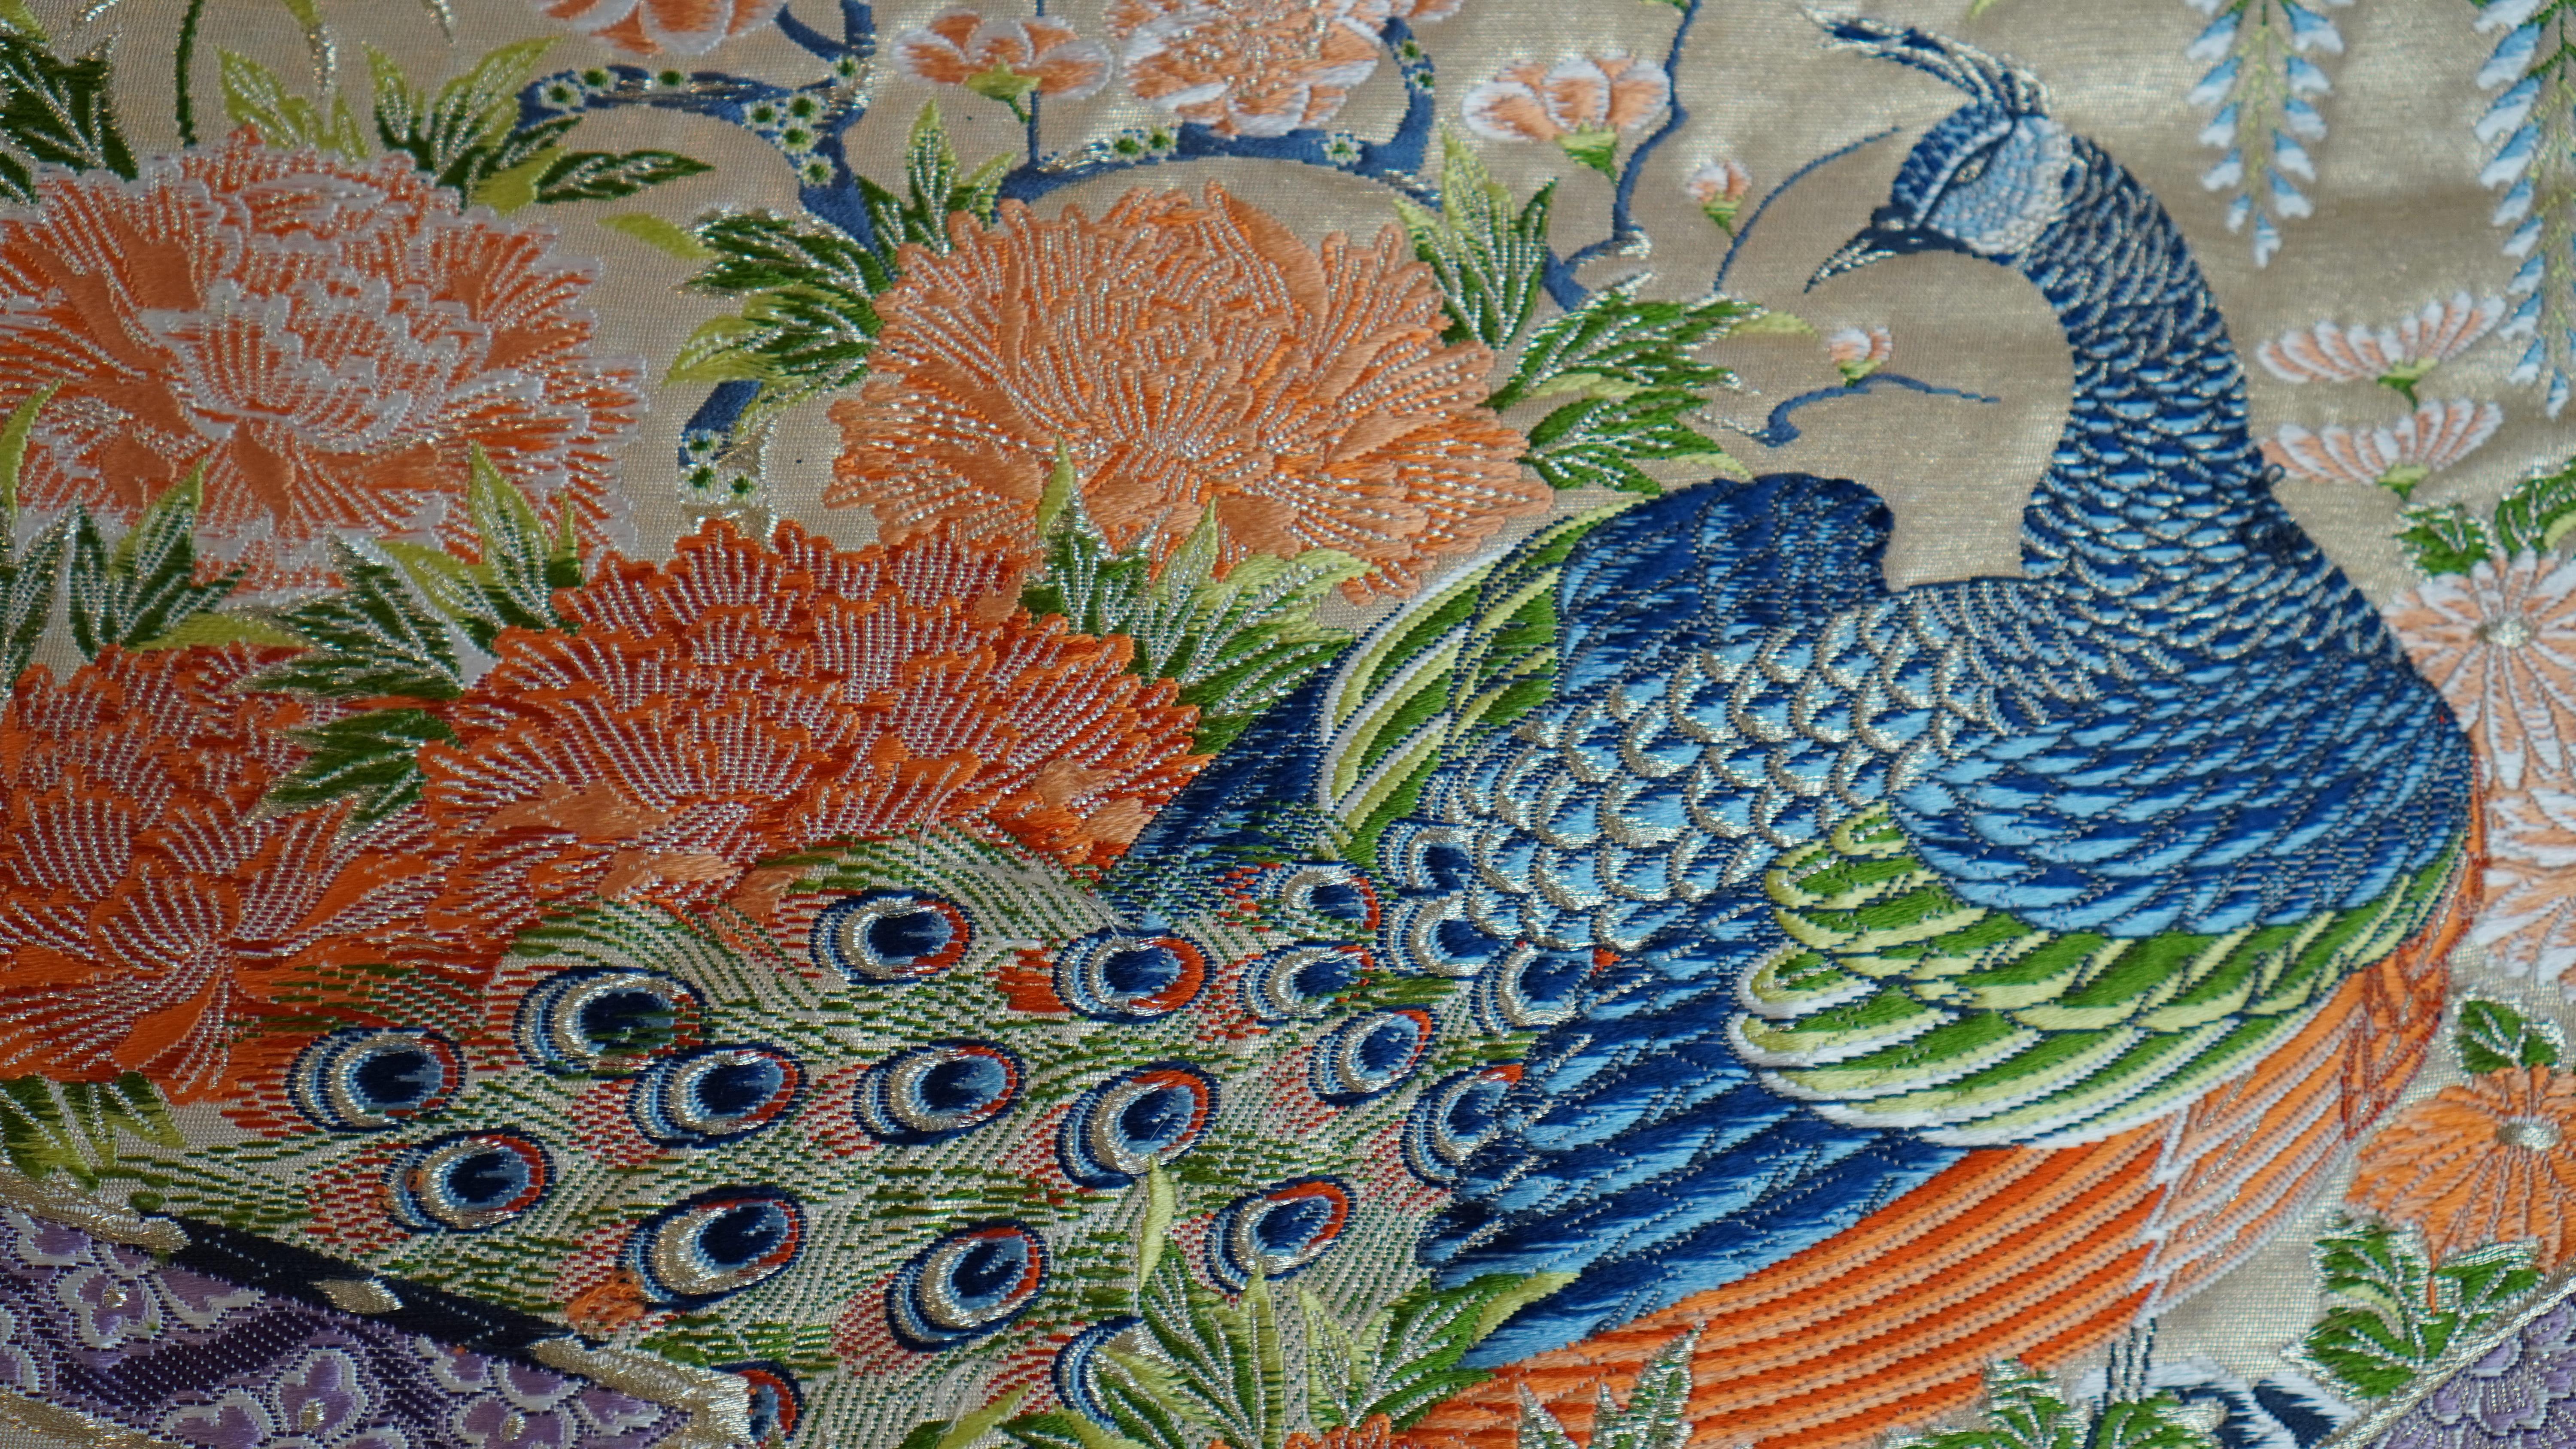 Kimono Art / Japanese Wall Art / Wall Decoration, the King of Peacock In Excellent Condition For Sale In Shibuya City, Tokyo